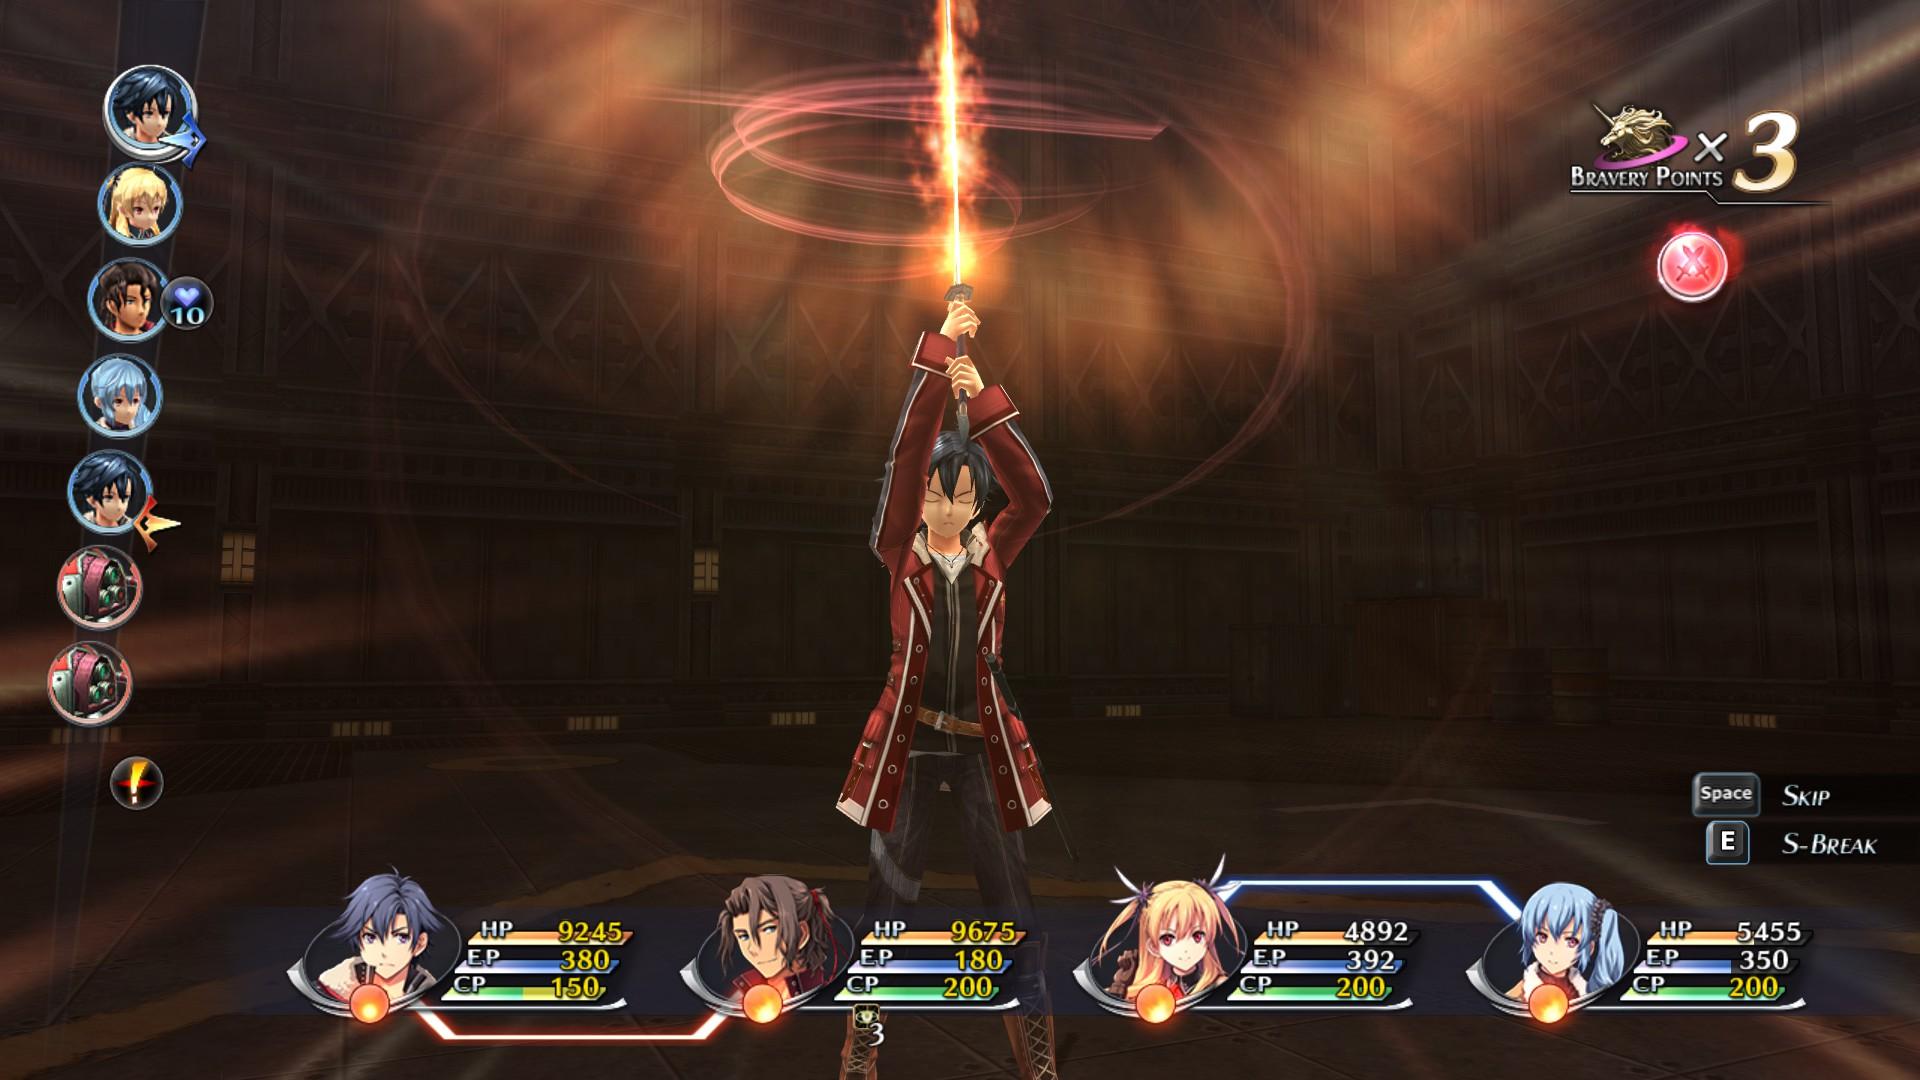 Screenshot №1 from game The Legend of Heroes: Trails of Cold Steel II